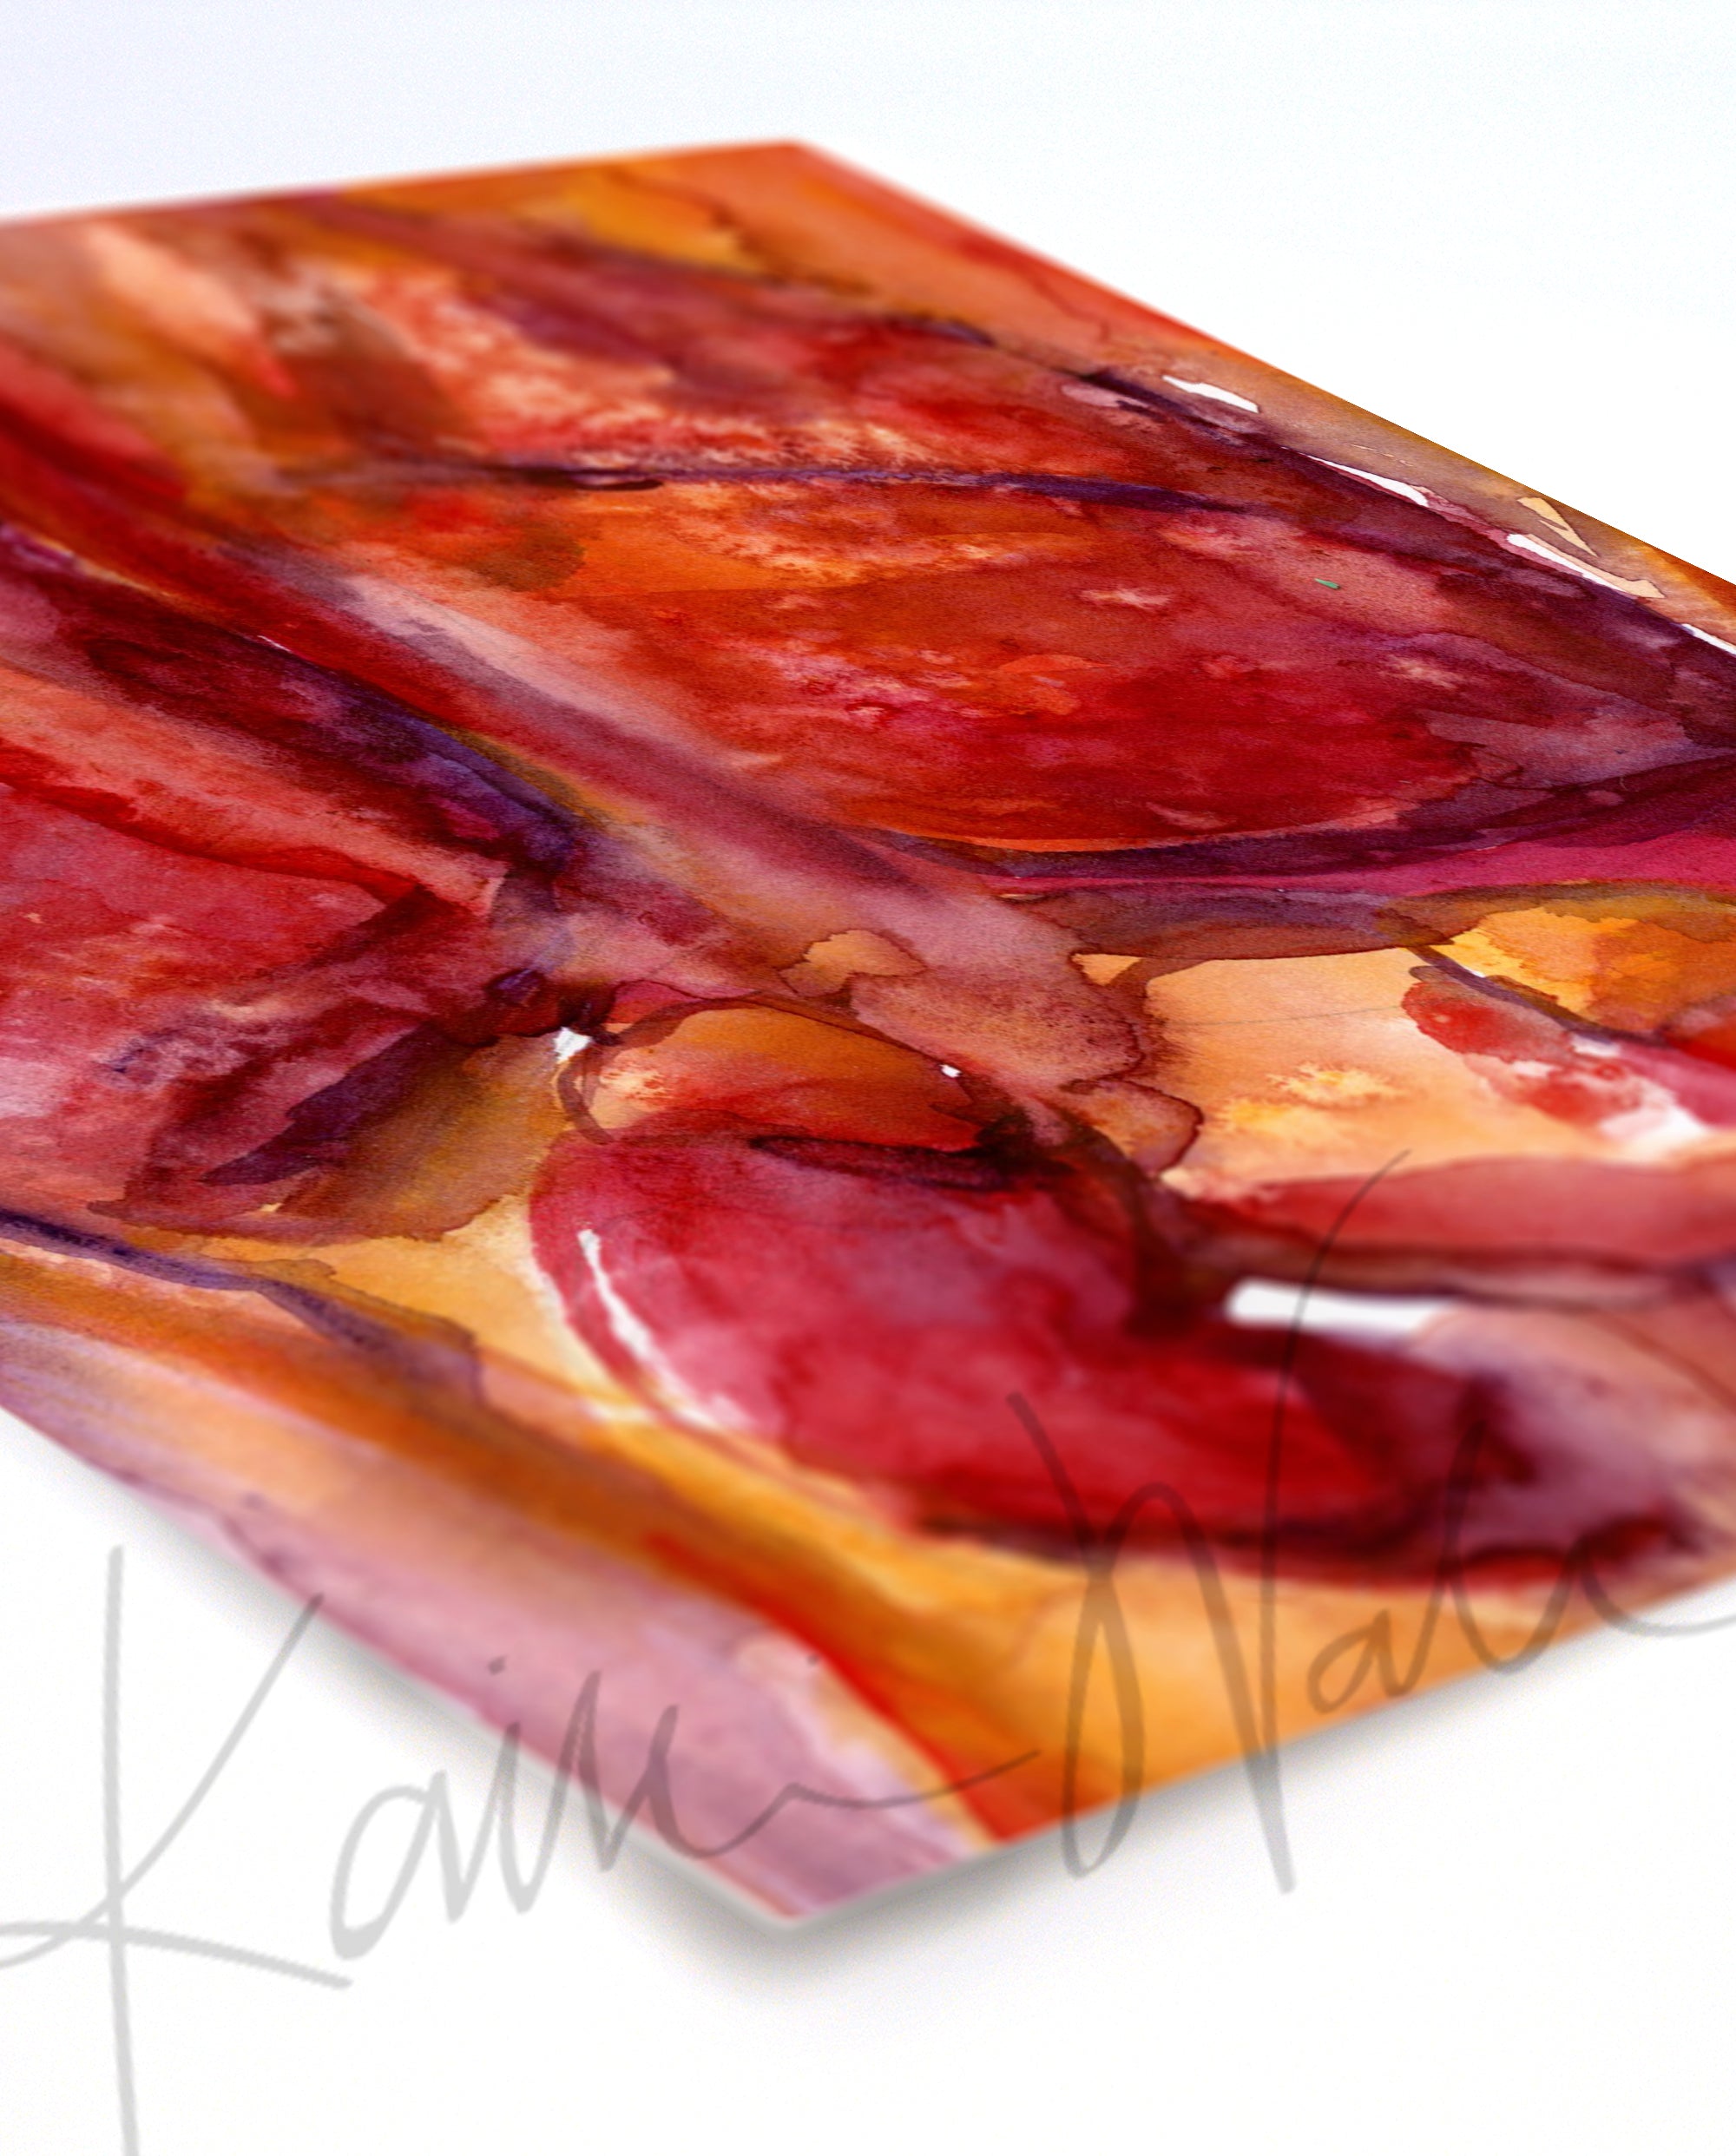 Unframed watercolor painting at an angle of the internal trunk organs in reds and oranges.